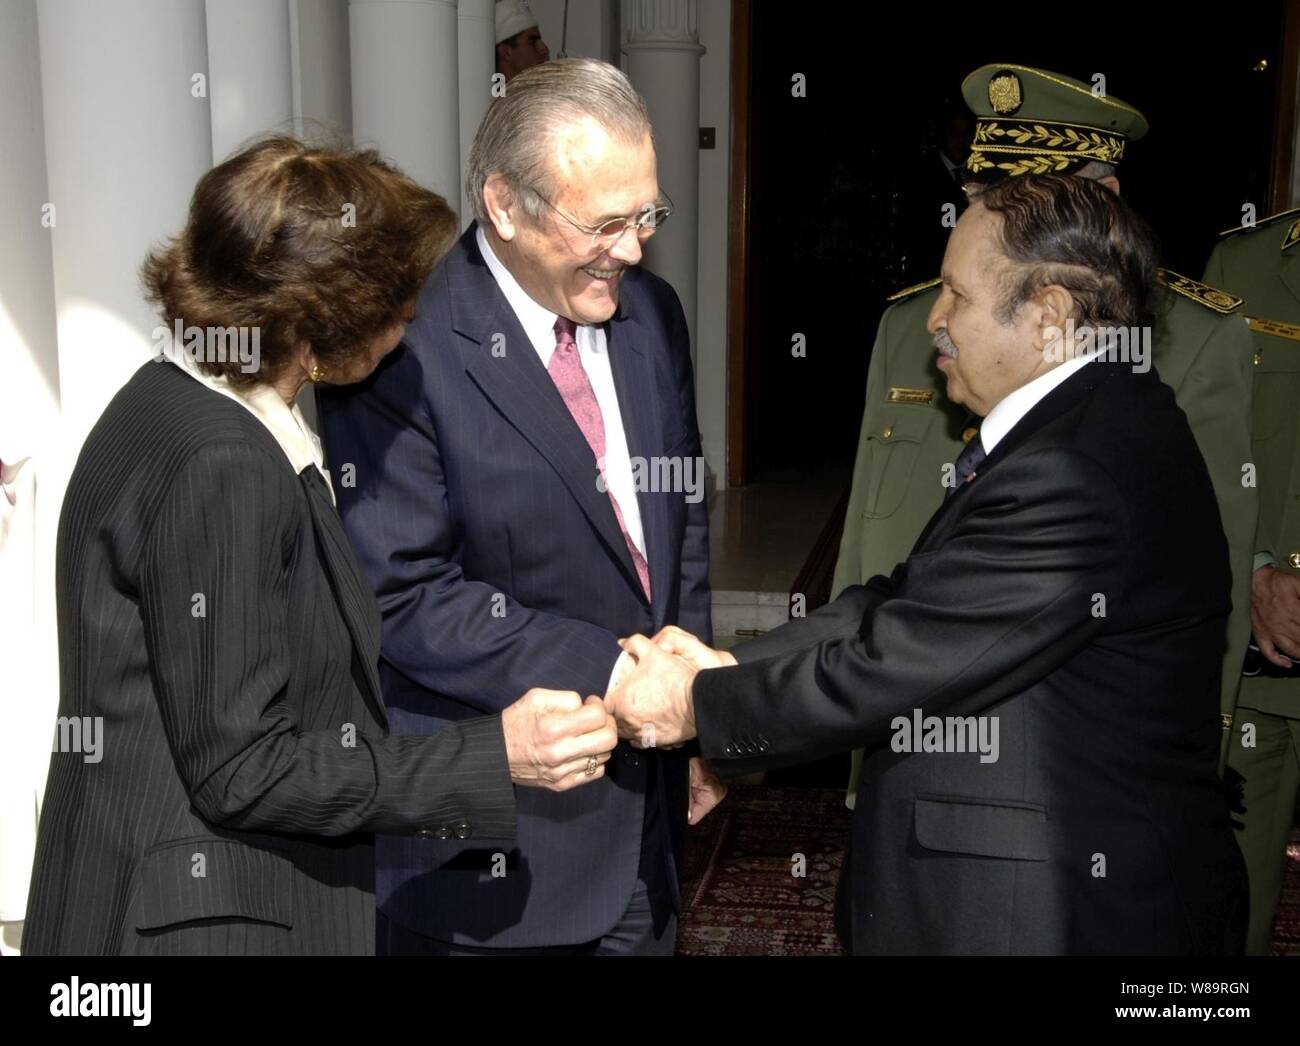 Secretary of Defense Donald H. Rumsfeld says goodbye to Algerian President Abdelaziz Bouteflika in Algiers, Algeria, on Feb. 12, 2006.  Rumsfeld met with delegations from the Mediterranean Dialogue countries of Algeria, Egypt, Israel, Jordan, Mauritania, Morocco and Tunisia earlier at the NATO Ministerial in Taormina, Sicily.  Rumsfeld and Bouteflika met in Algiers to continue those talks and discuss regional security issues. Stock Photo